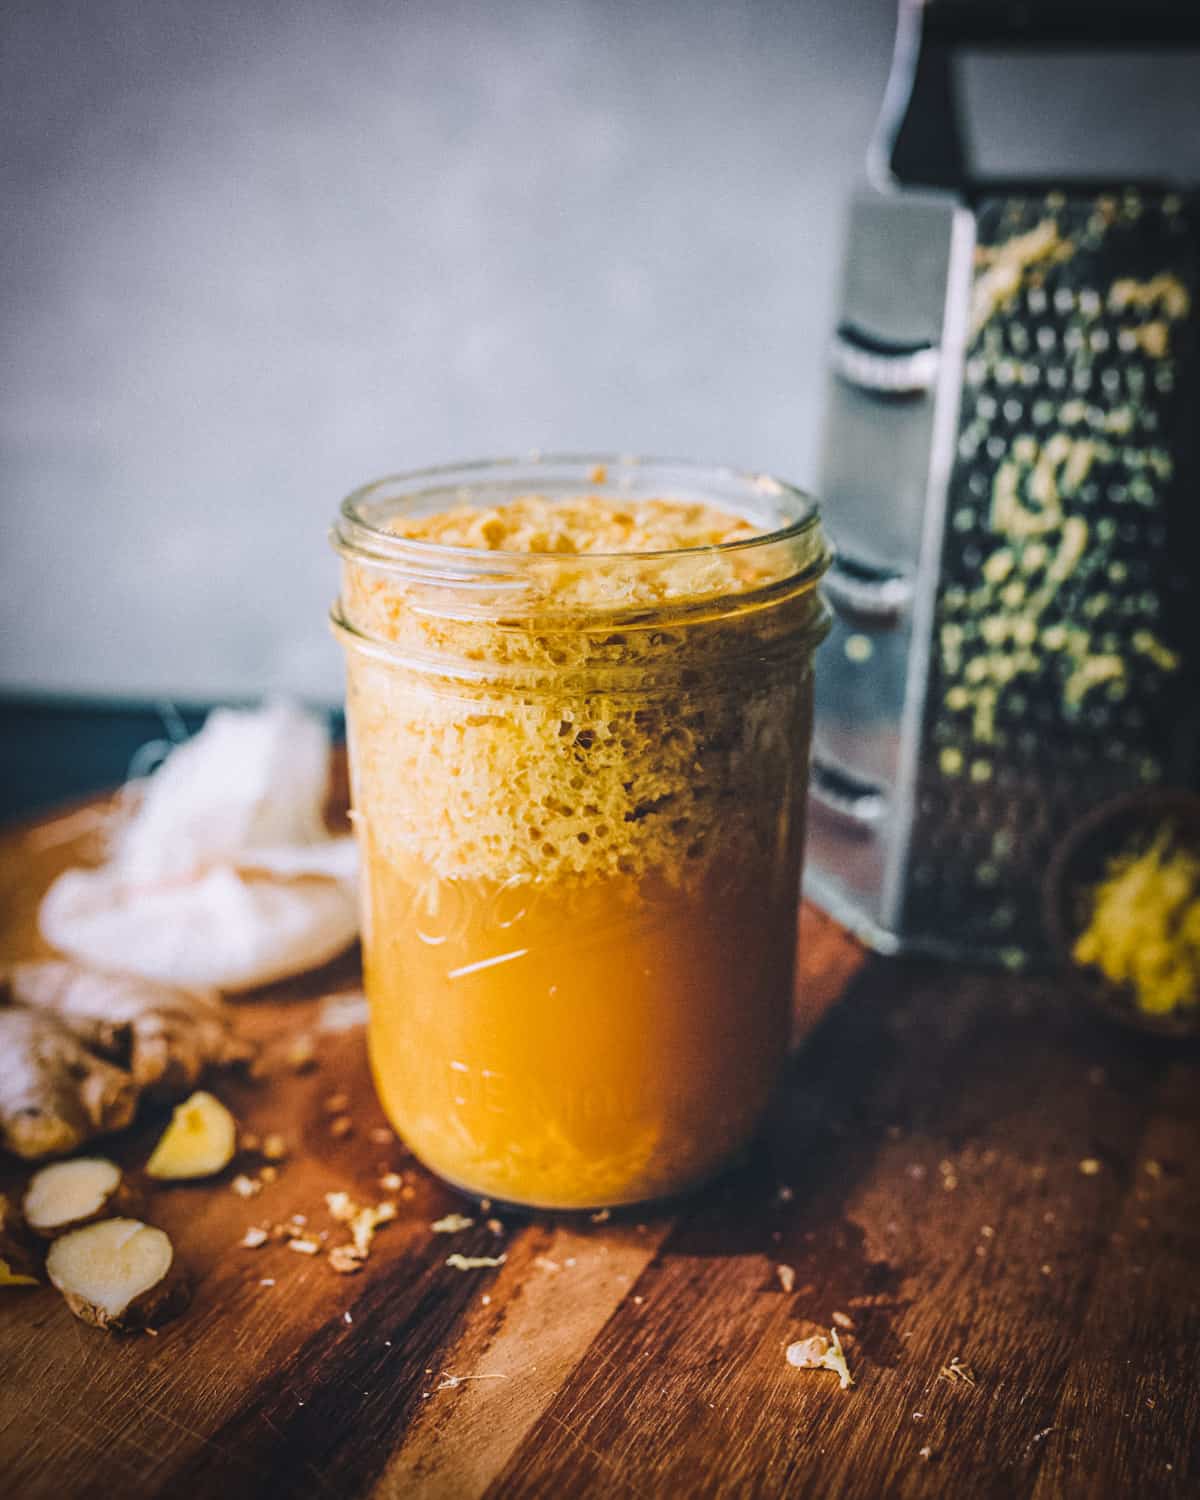 A ginger bug fermenting in a jar on a dark wood surface, surrounded by fresh ginger and a grater,